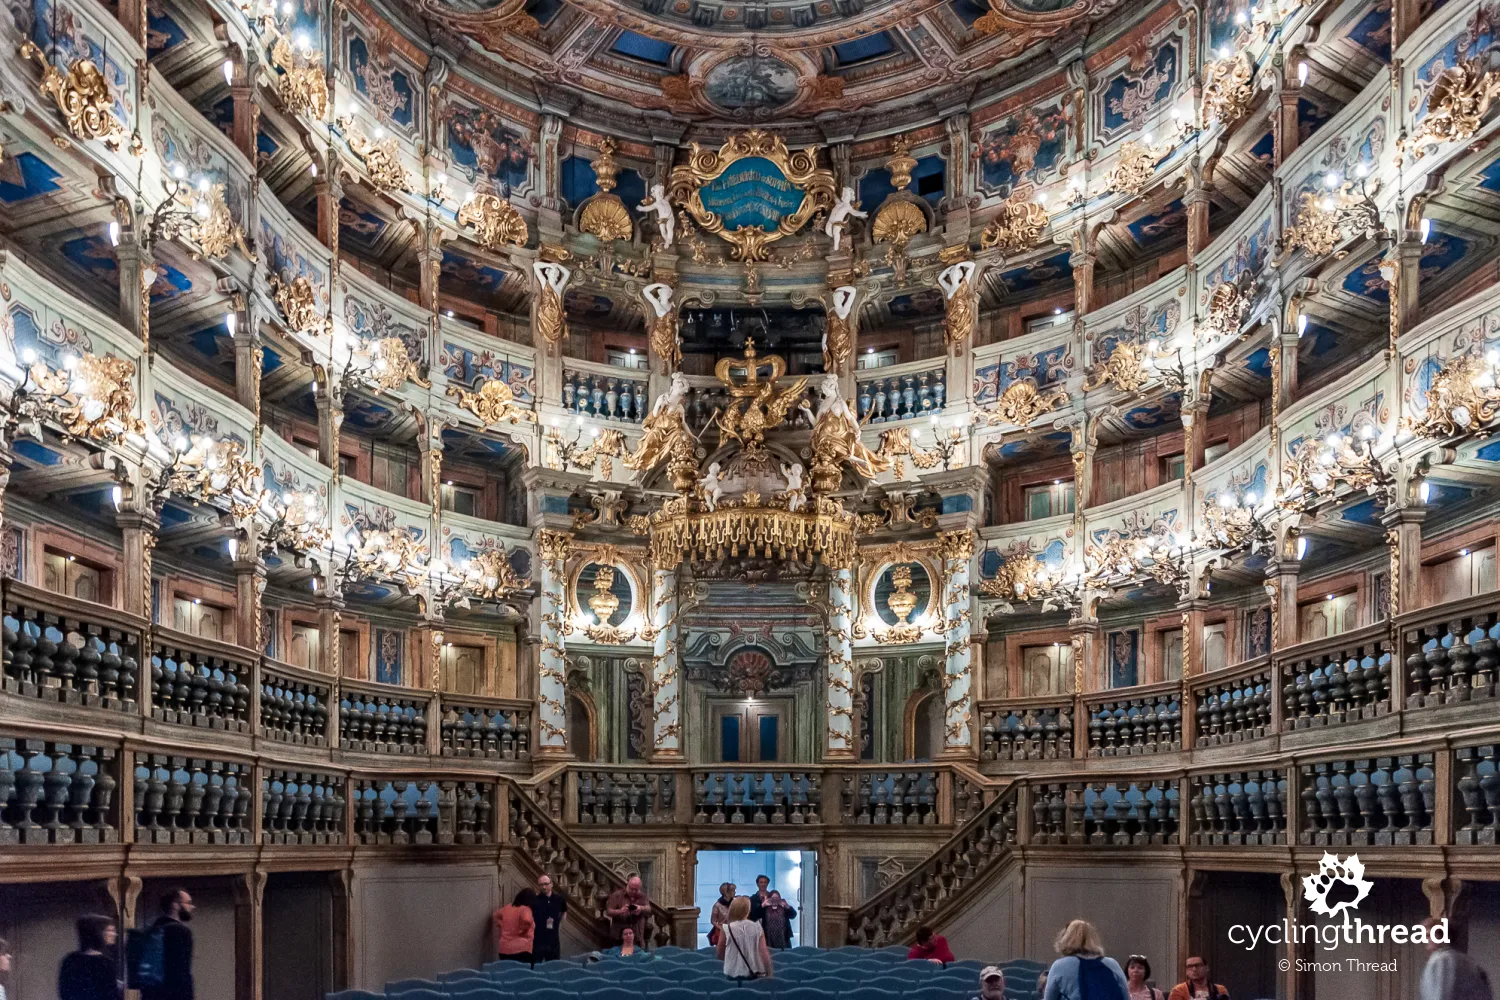 The Margravial Opera House in Bayreuth